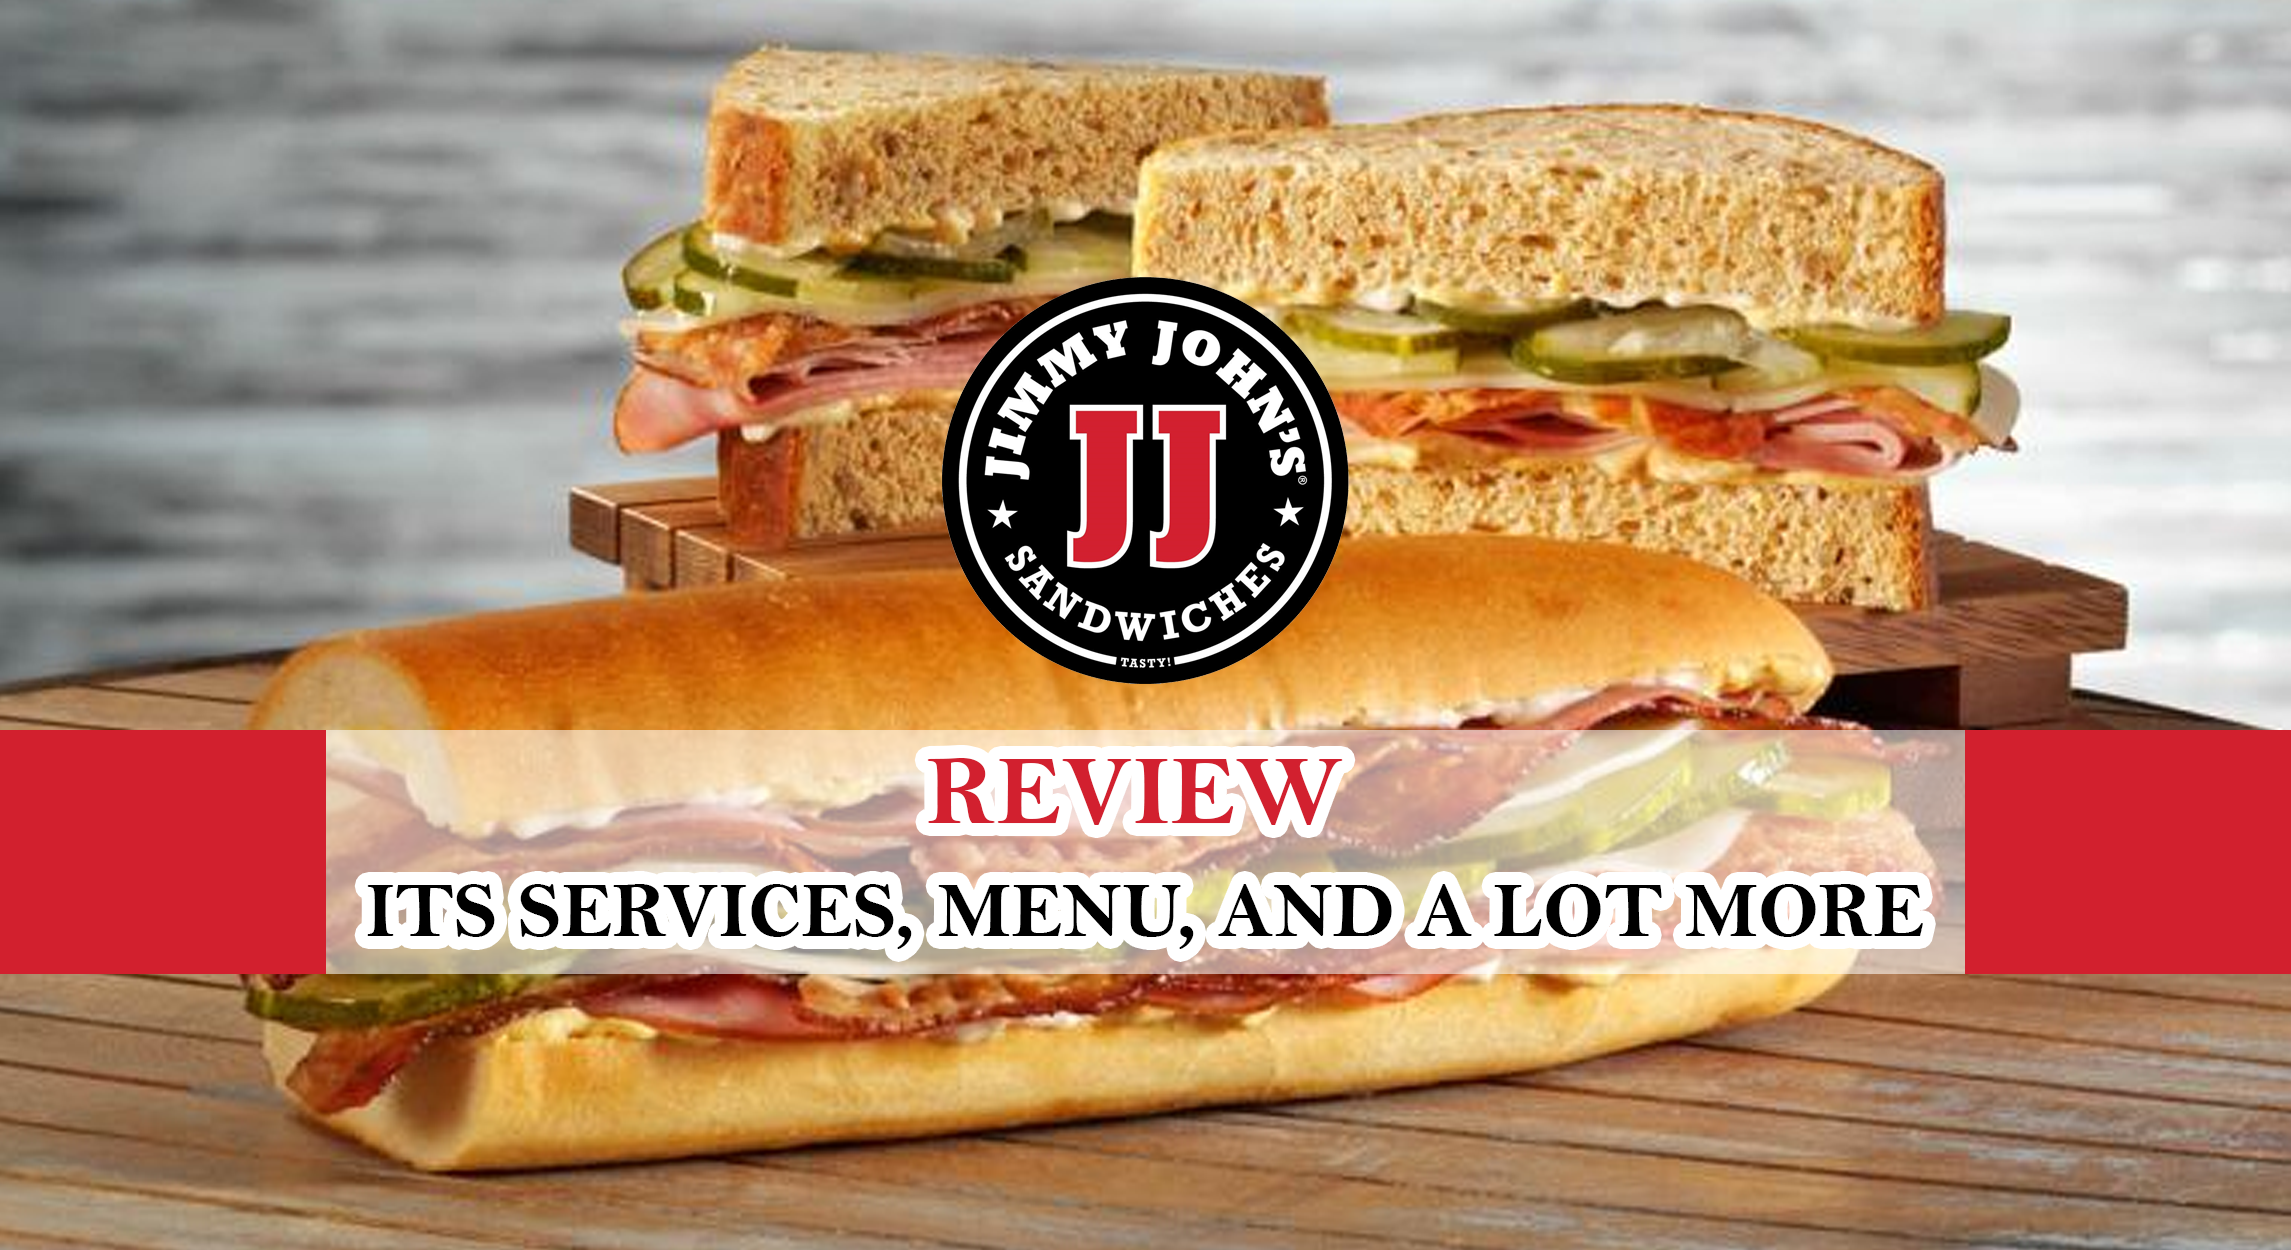 Jimmy Johns Review- Its Services, Menu, And A Lot More